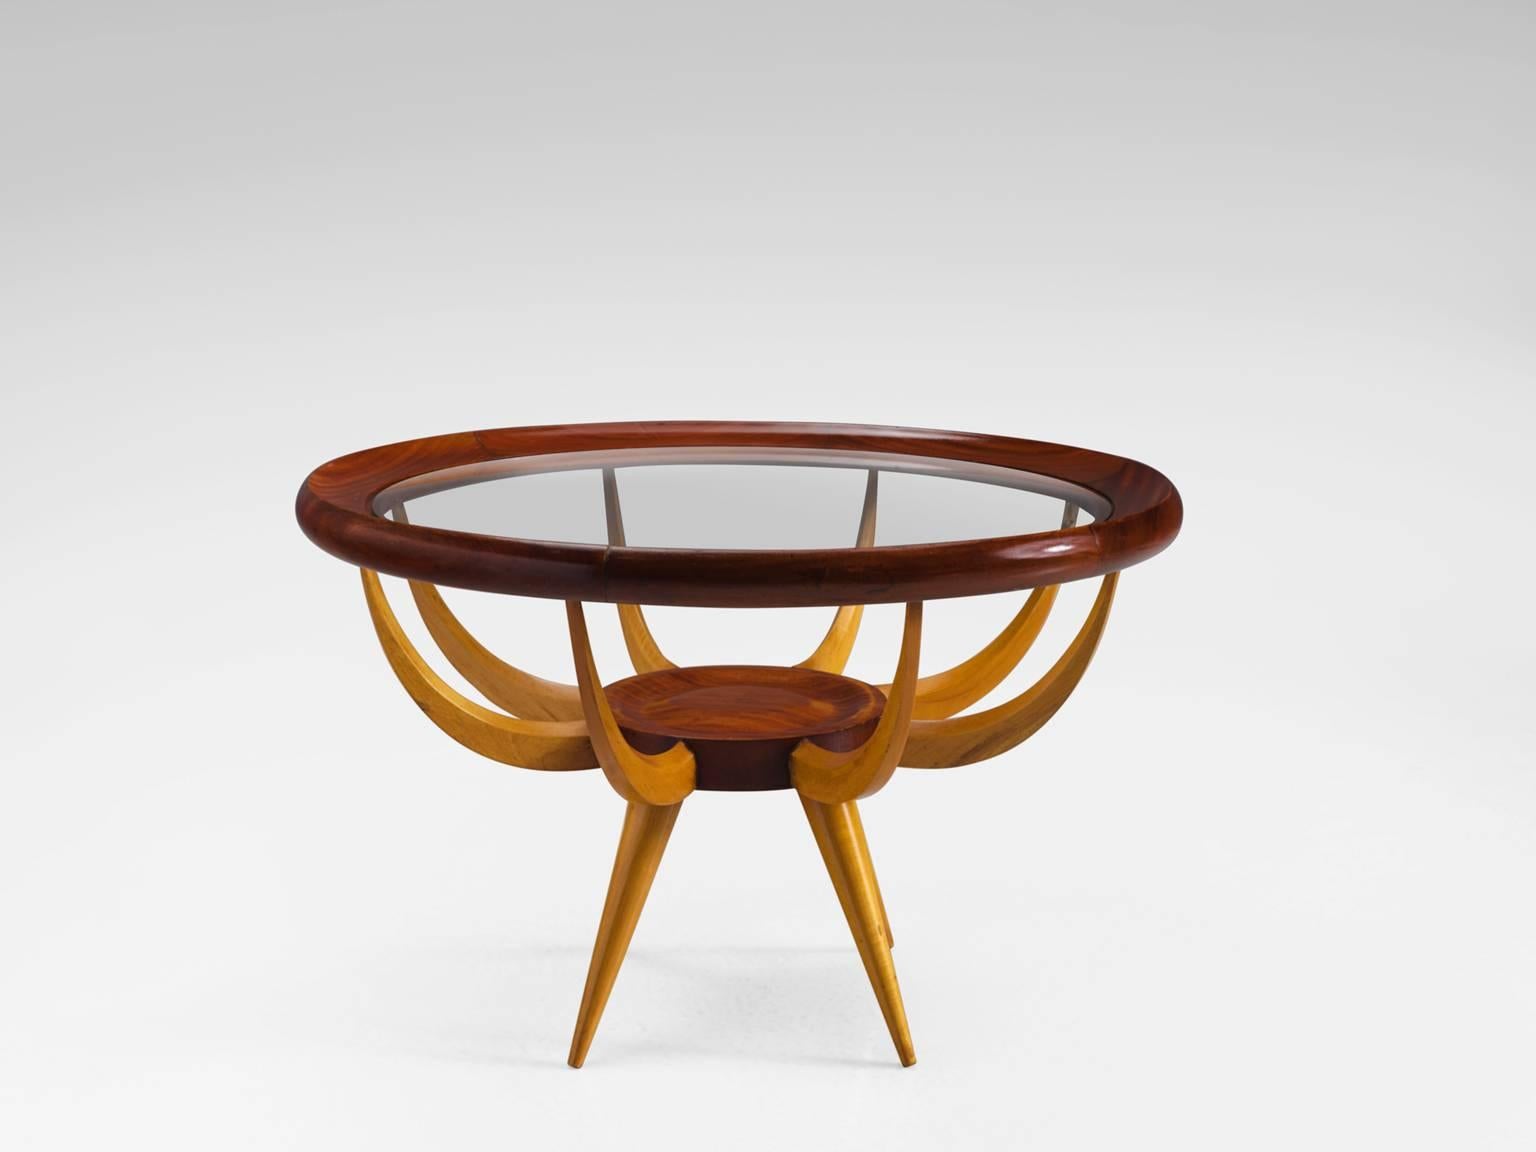 Giuseppi Scapinelli, side table, caviuana and glass, Italy, 1950s

This delicate round side table is designed by the Brazilian designer Scapinelli. The table features delicate organic wooden 'beams' that flow from the middle towards the bottom and